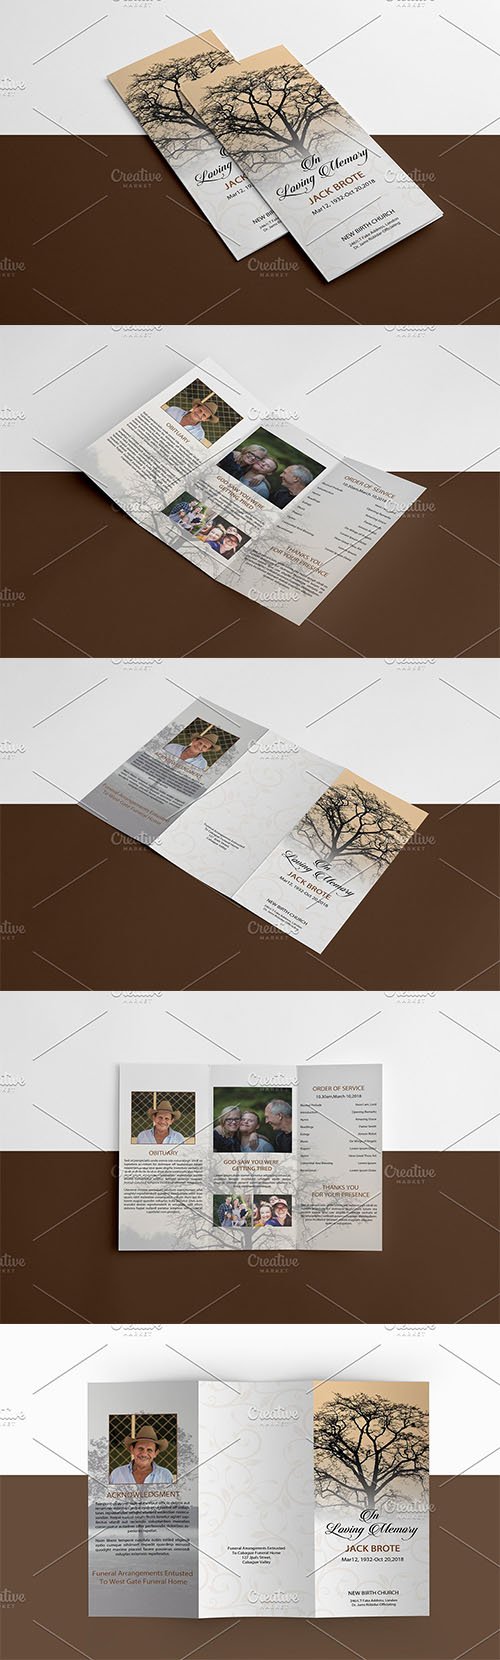 CreativeMarket - Trifold Funeral Template - V849 - 3283833